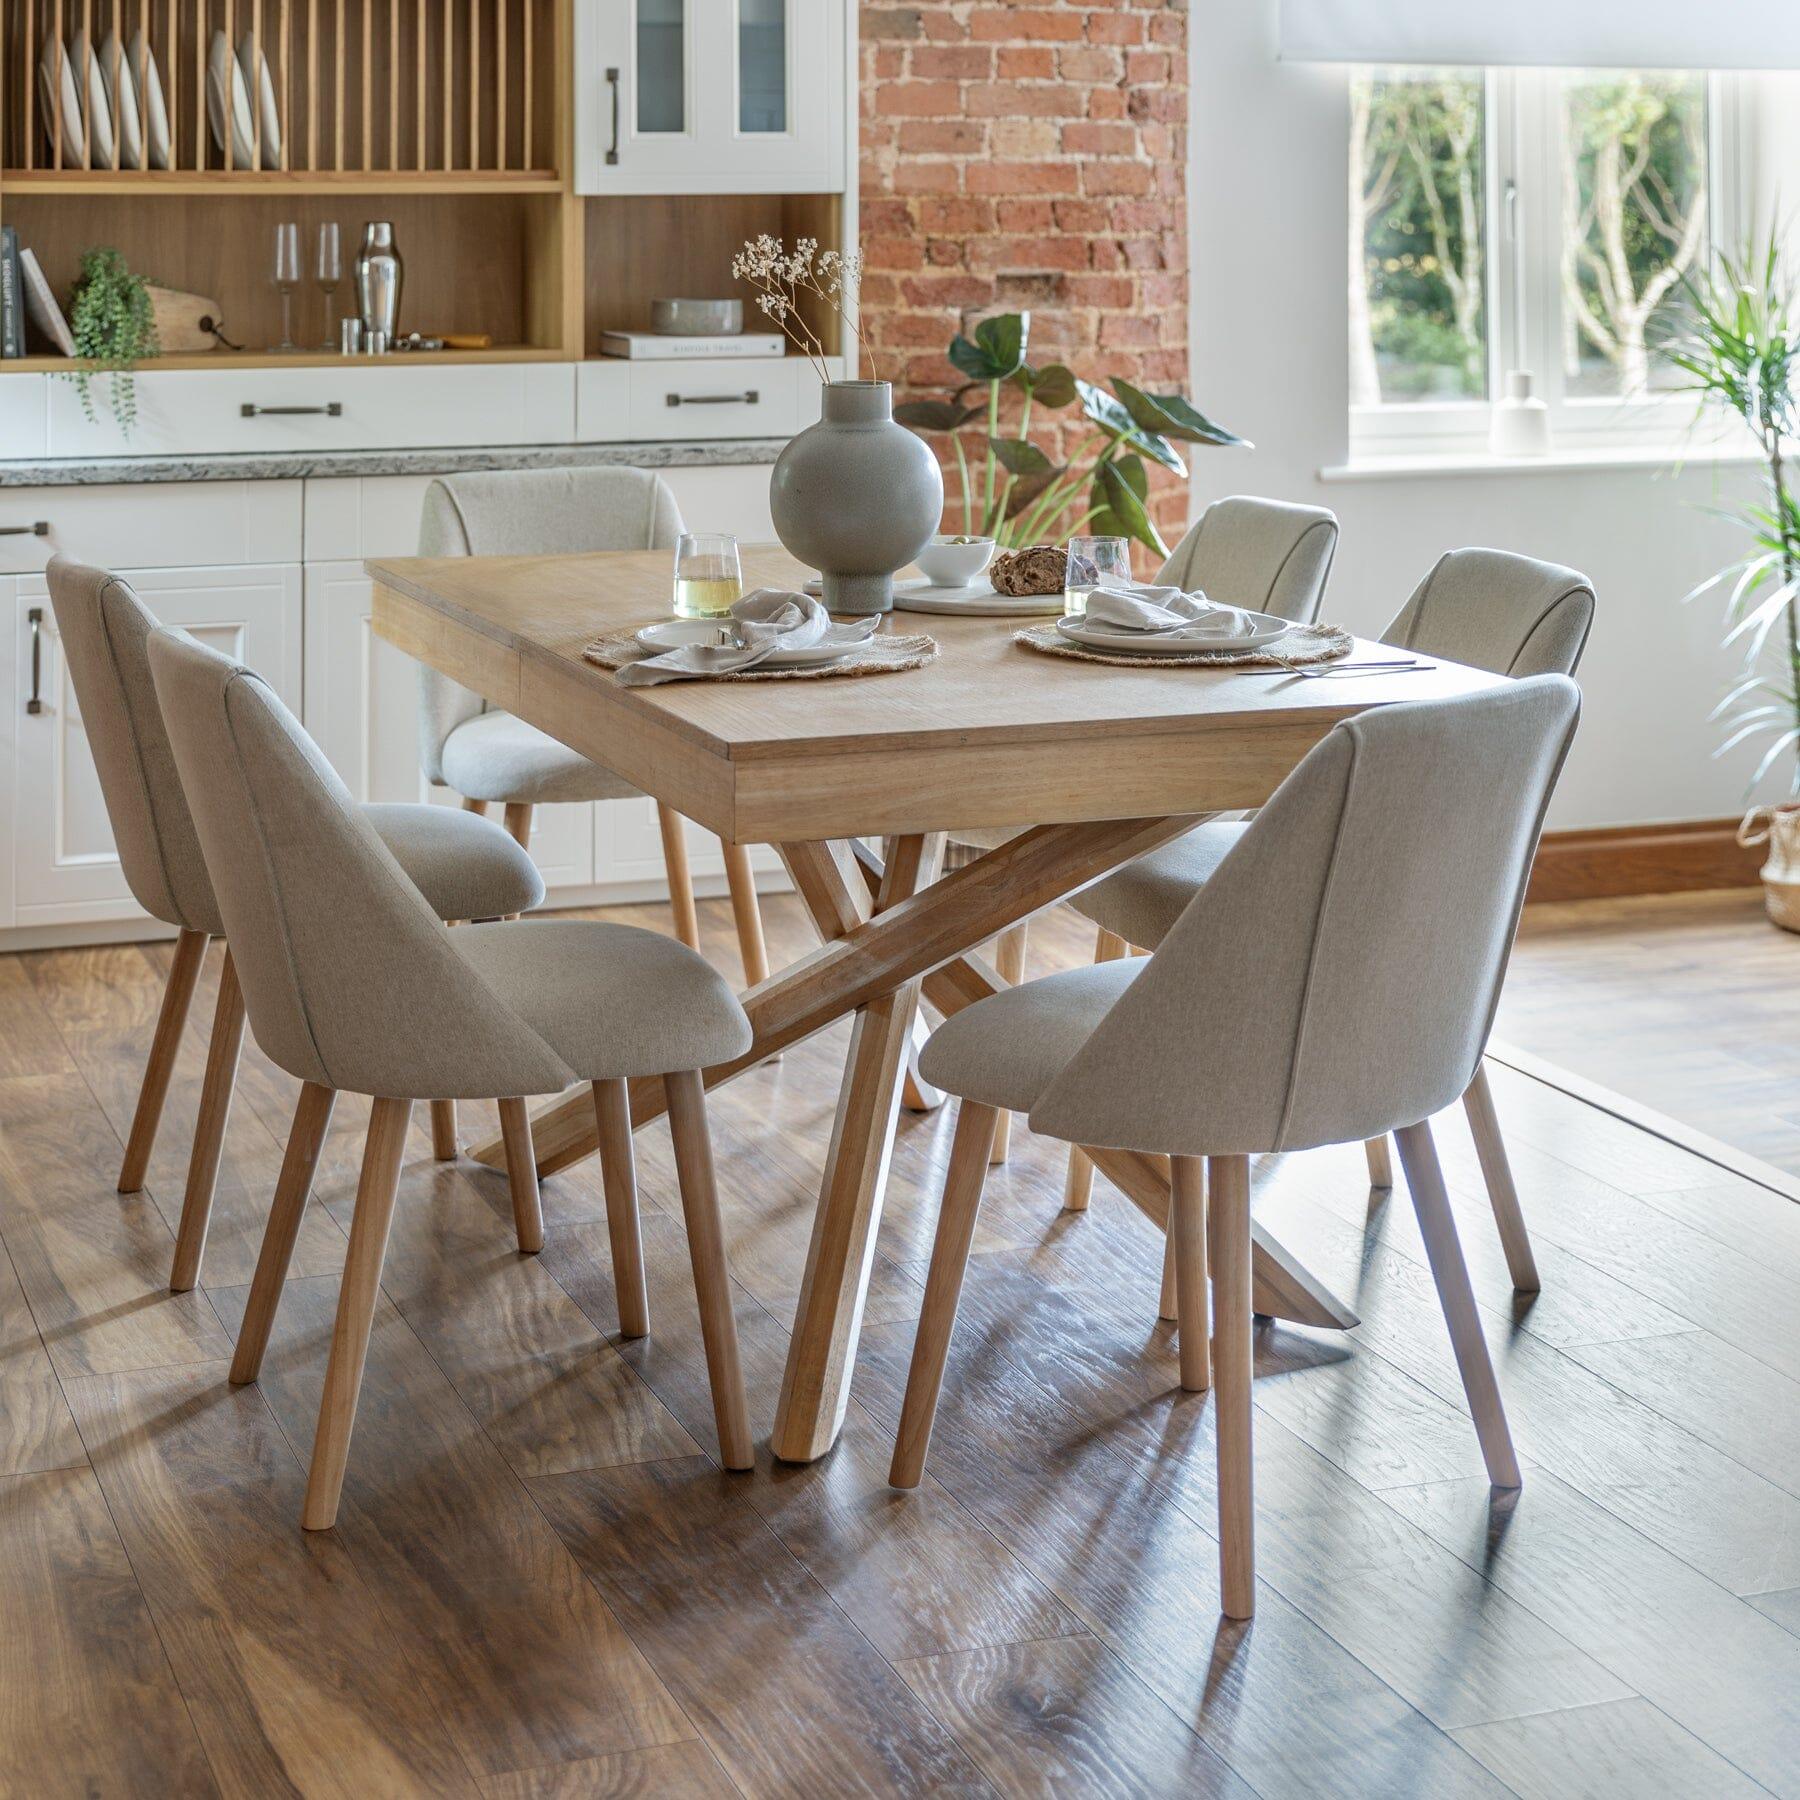 Amelia Whitewash Extendable Dining Table Set - 6 Seater - Freya Oatmeal Dining Chairs With Oak Legs